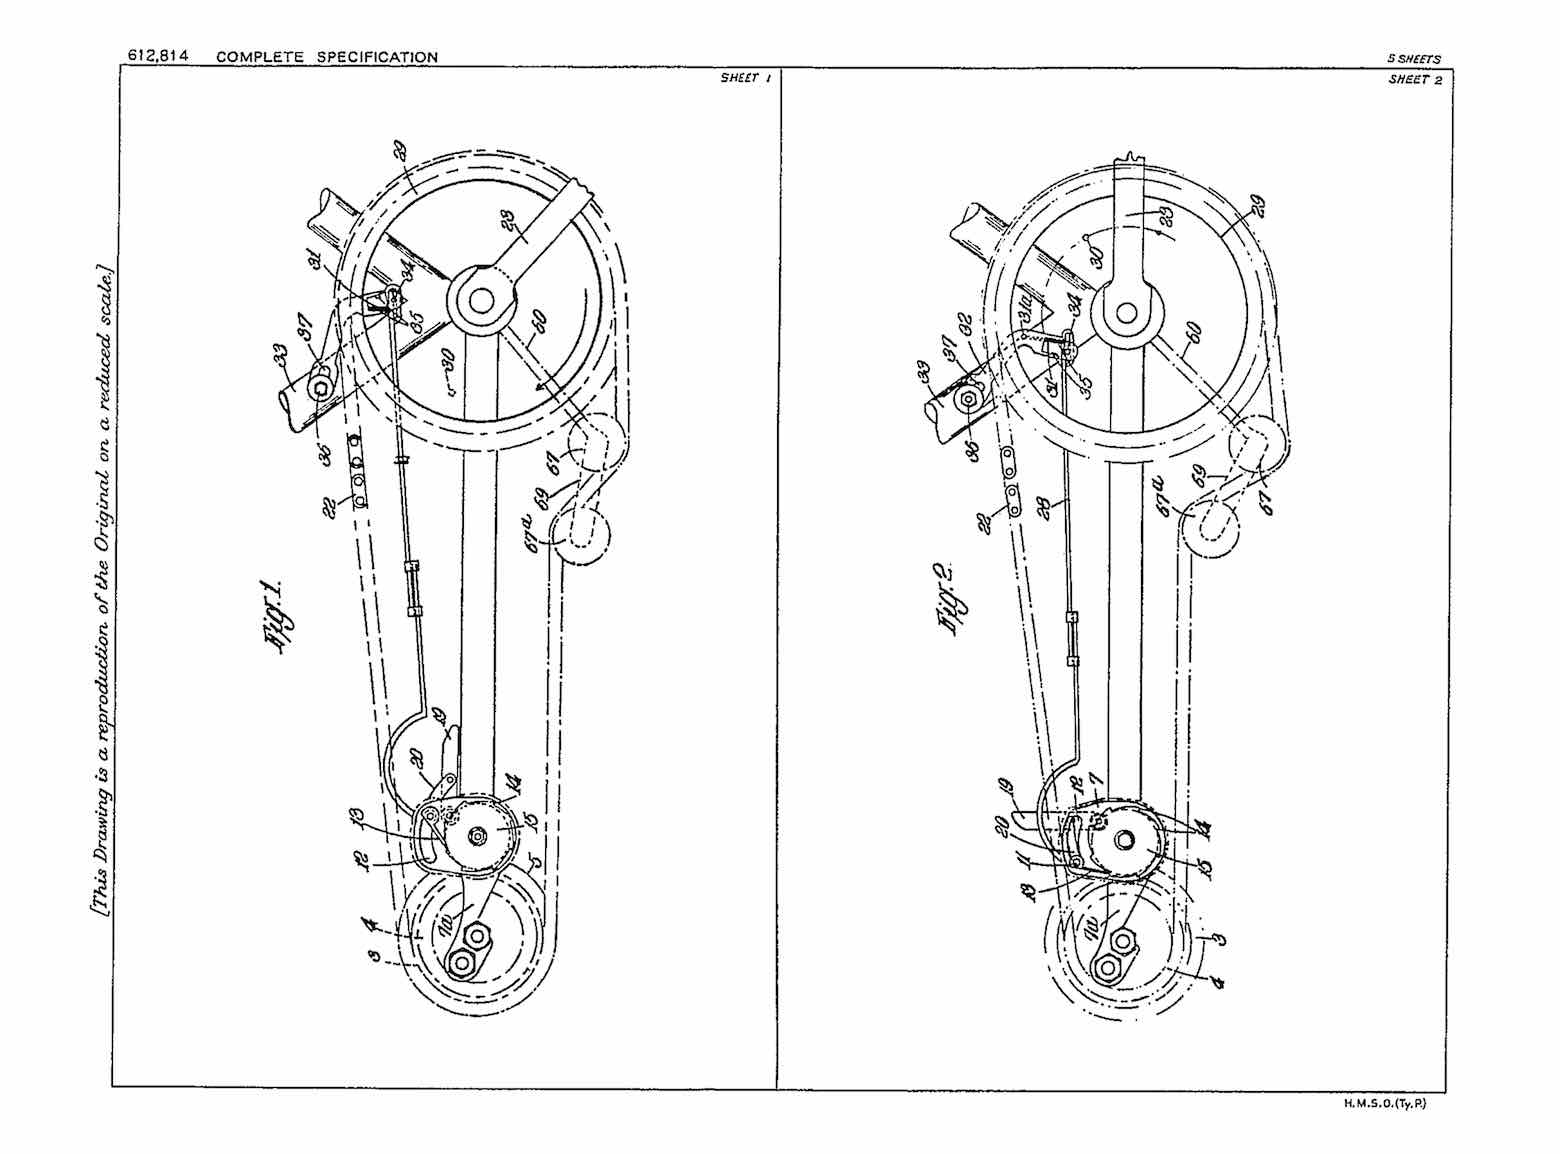 UK Patent 612,814 - Overhill Two-speed scan 9 main image